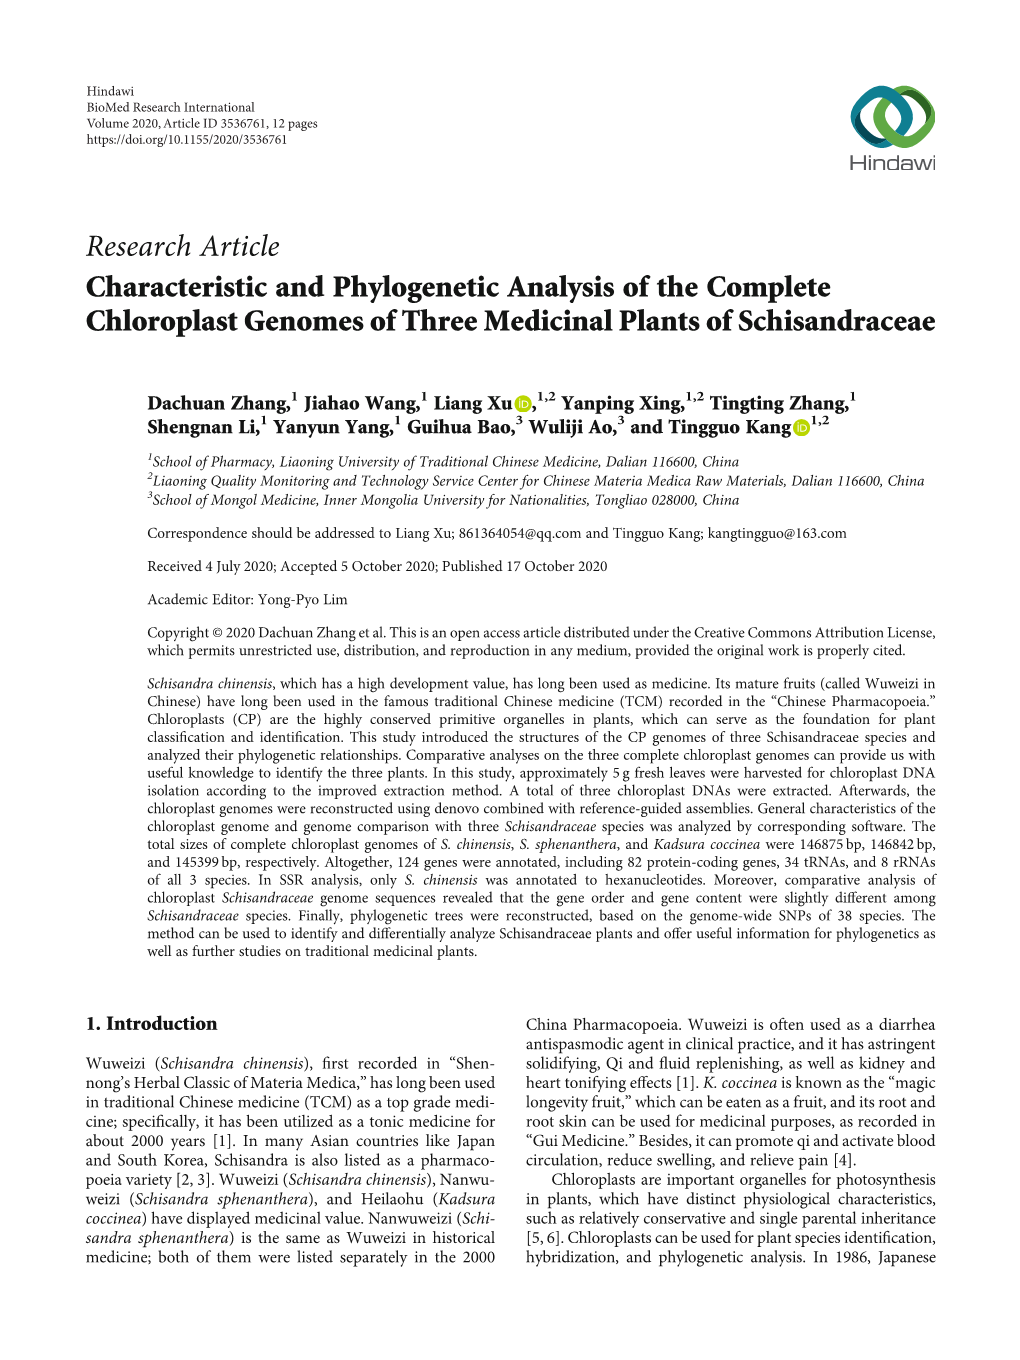 Research Article Characteristic and Phylogenetic Analysis of the Complete Chloroplast Genomes of Three Medicinal Plants of Schisandraceae